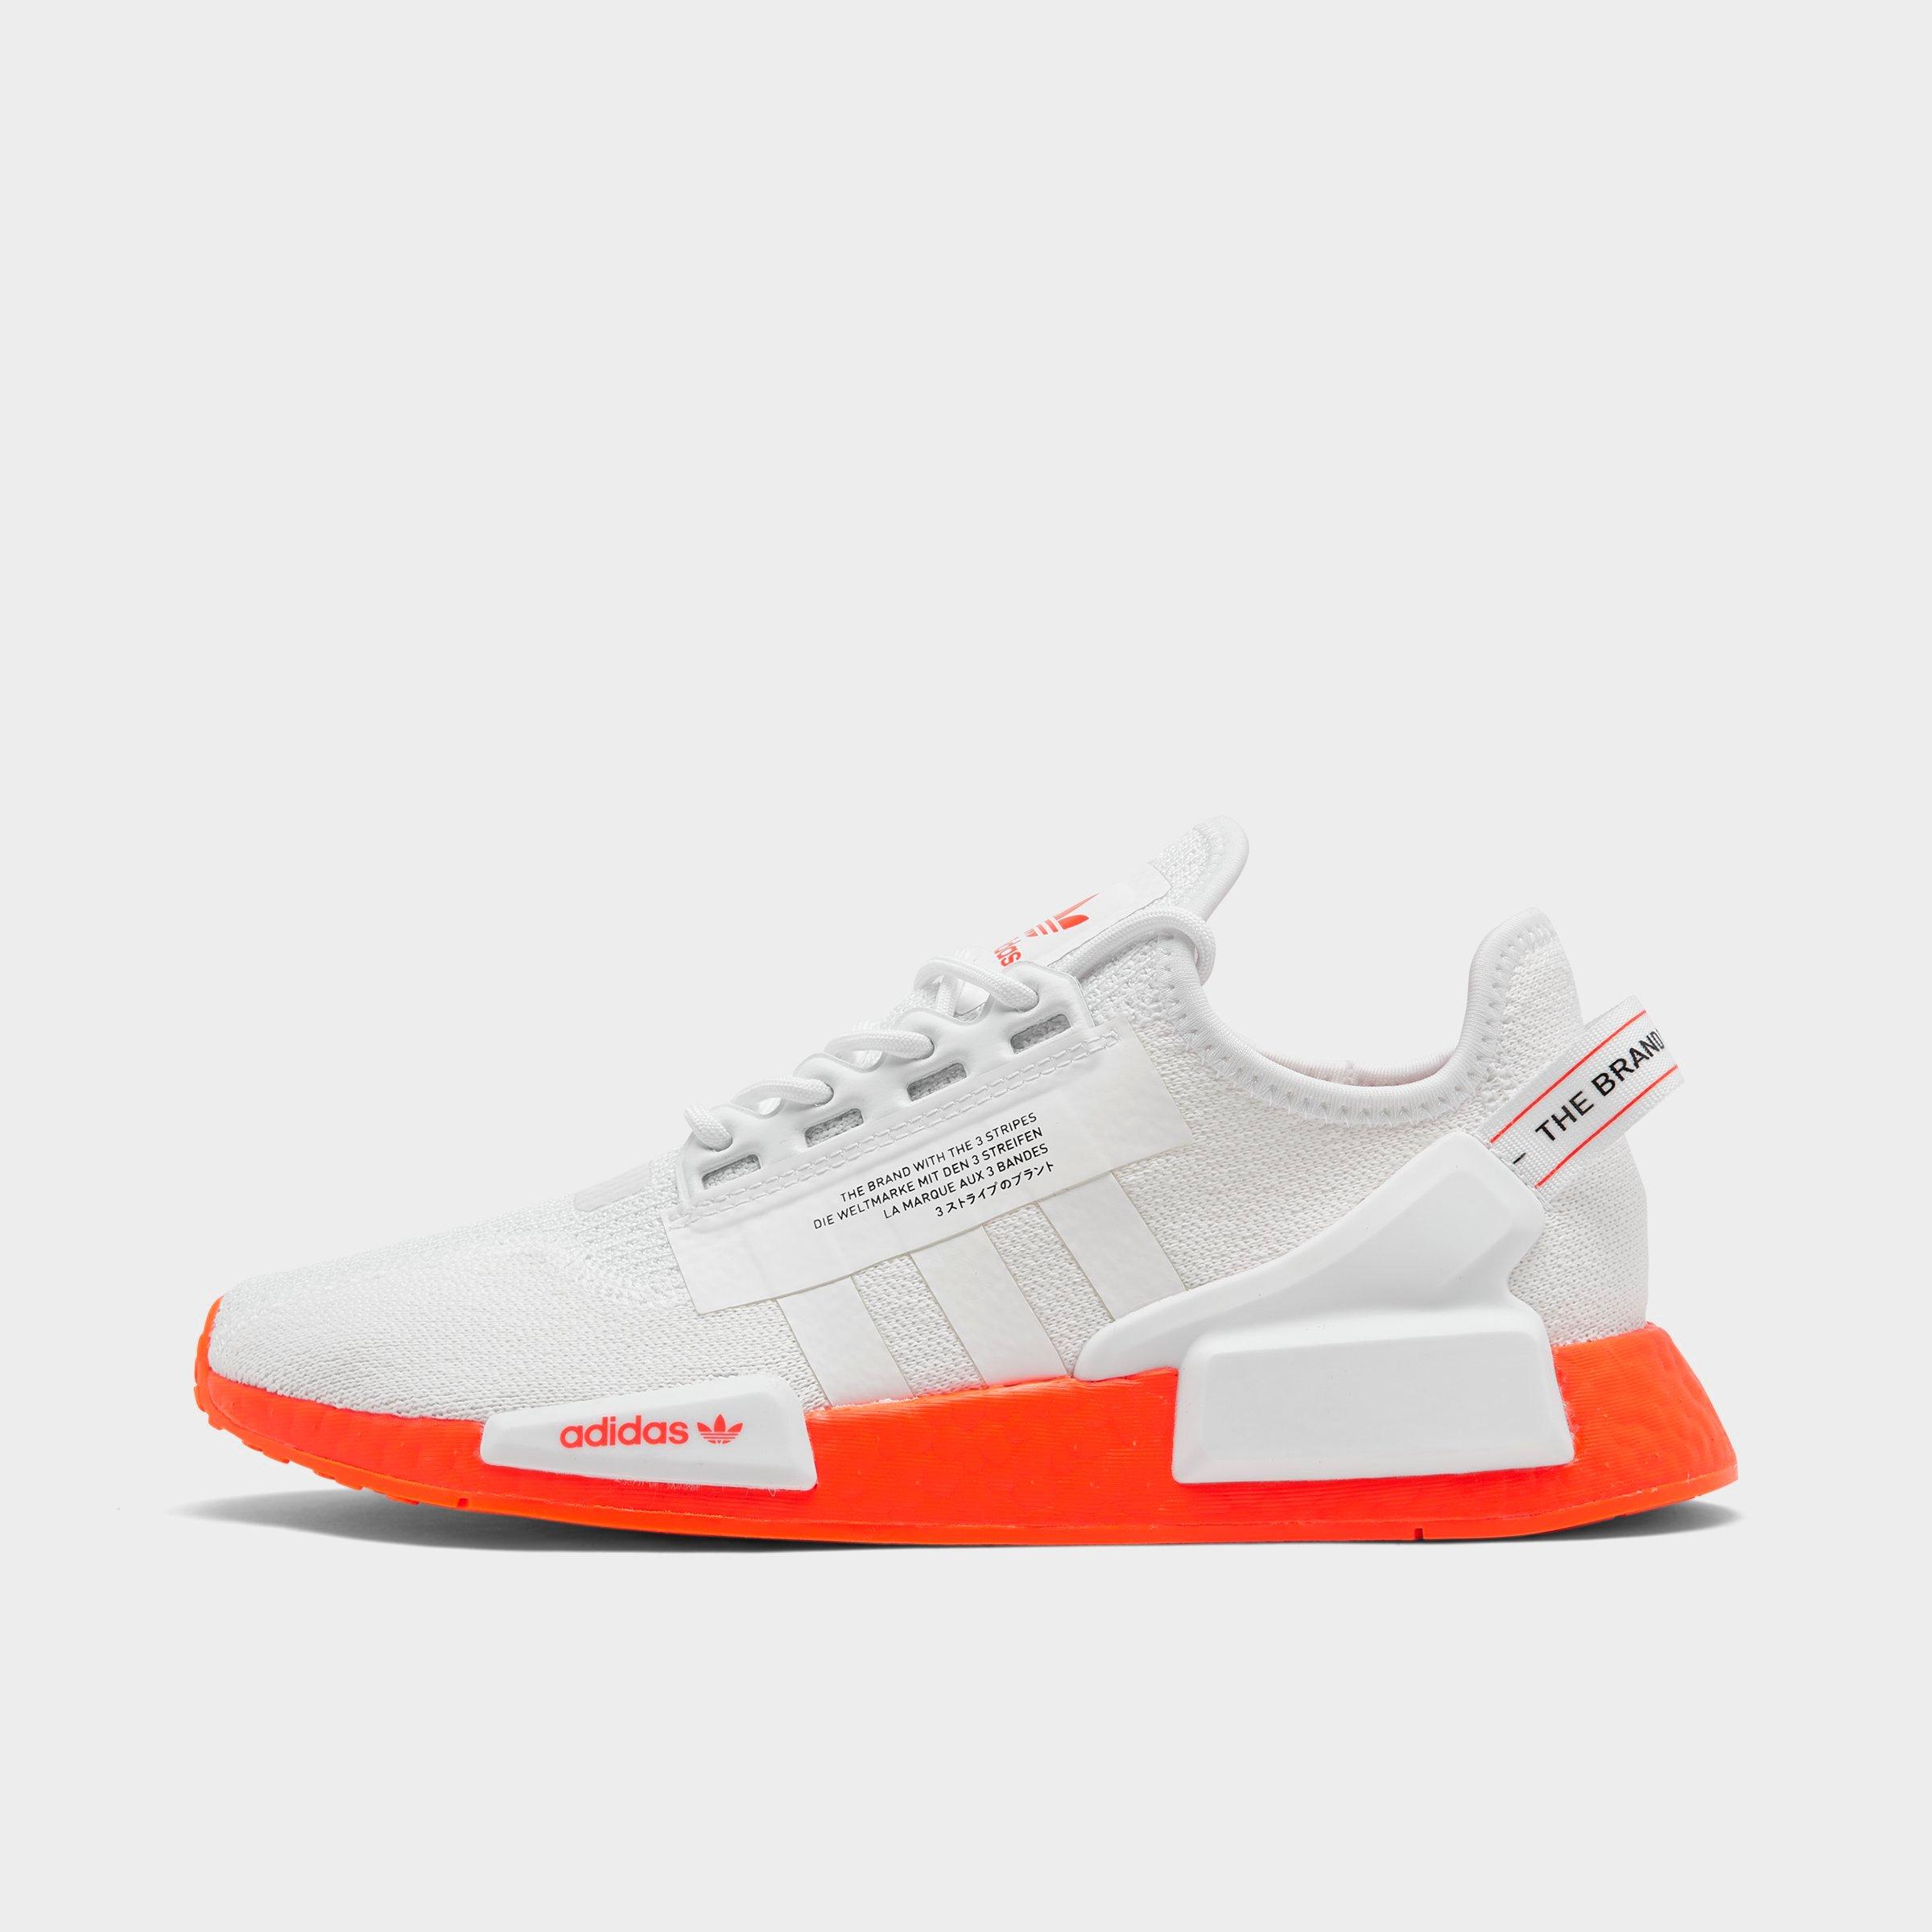 adidas NMD R1 Colorways Release Dates Pricing SBD Scelf